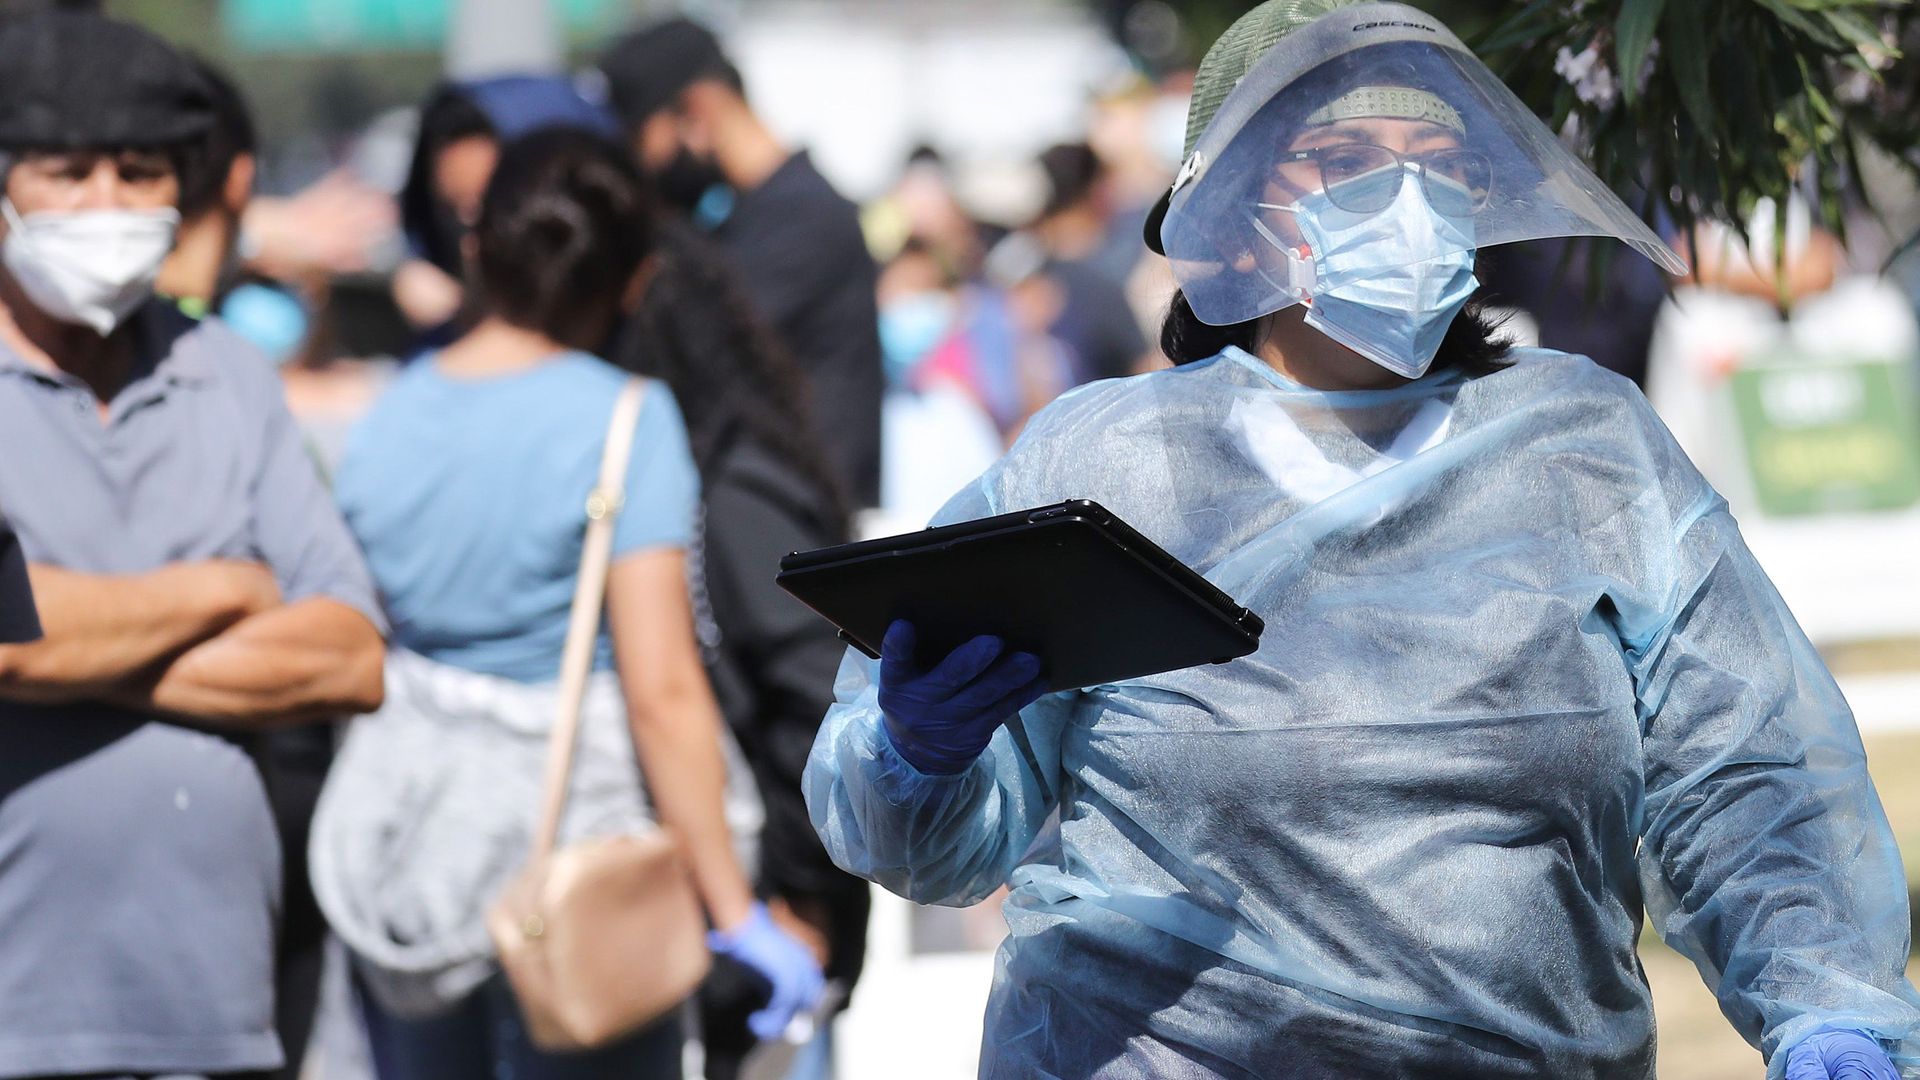 A worker in personal protective equipment (PPE) helps check in people at a COVID-19 testing center in Los Angeles, California. Photo: Mario Tama/Getty Images